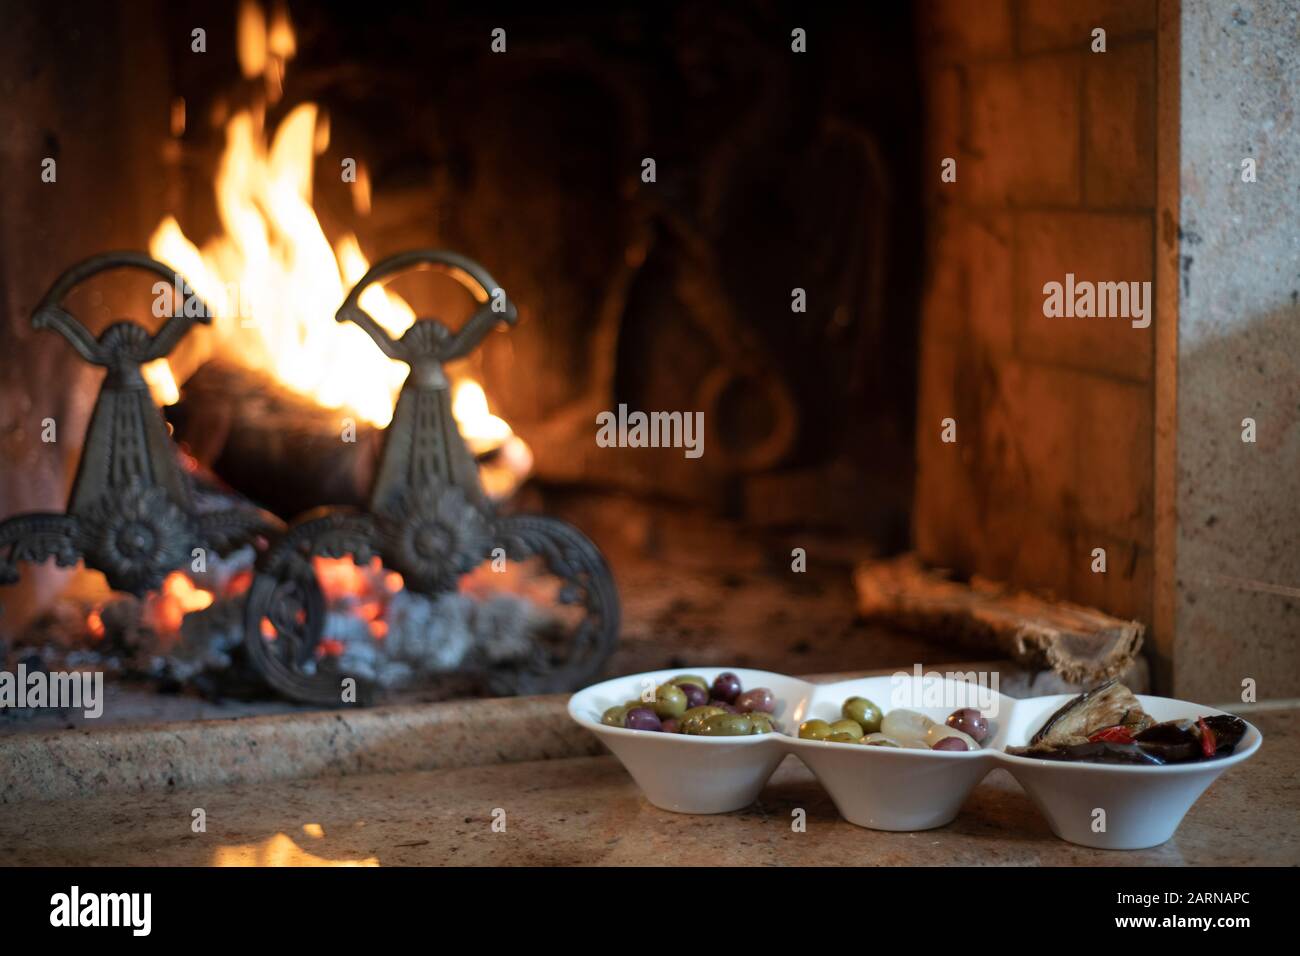 Bowls of Italian olives alongside a burning fire in a brick fireplace on a cold winter day in close up Stock Photo